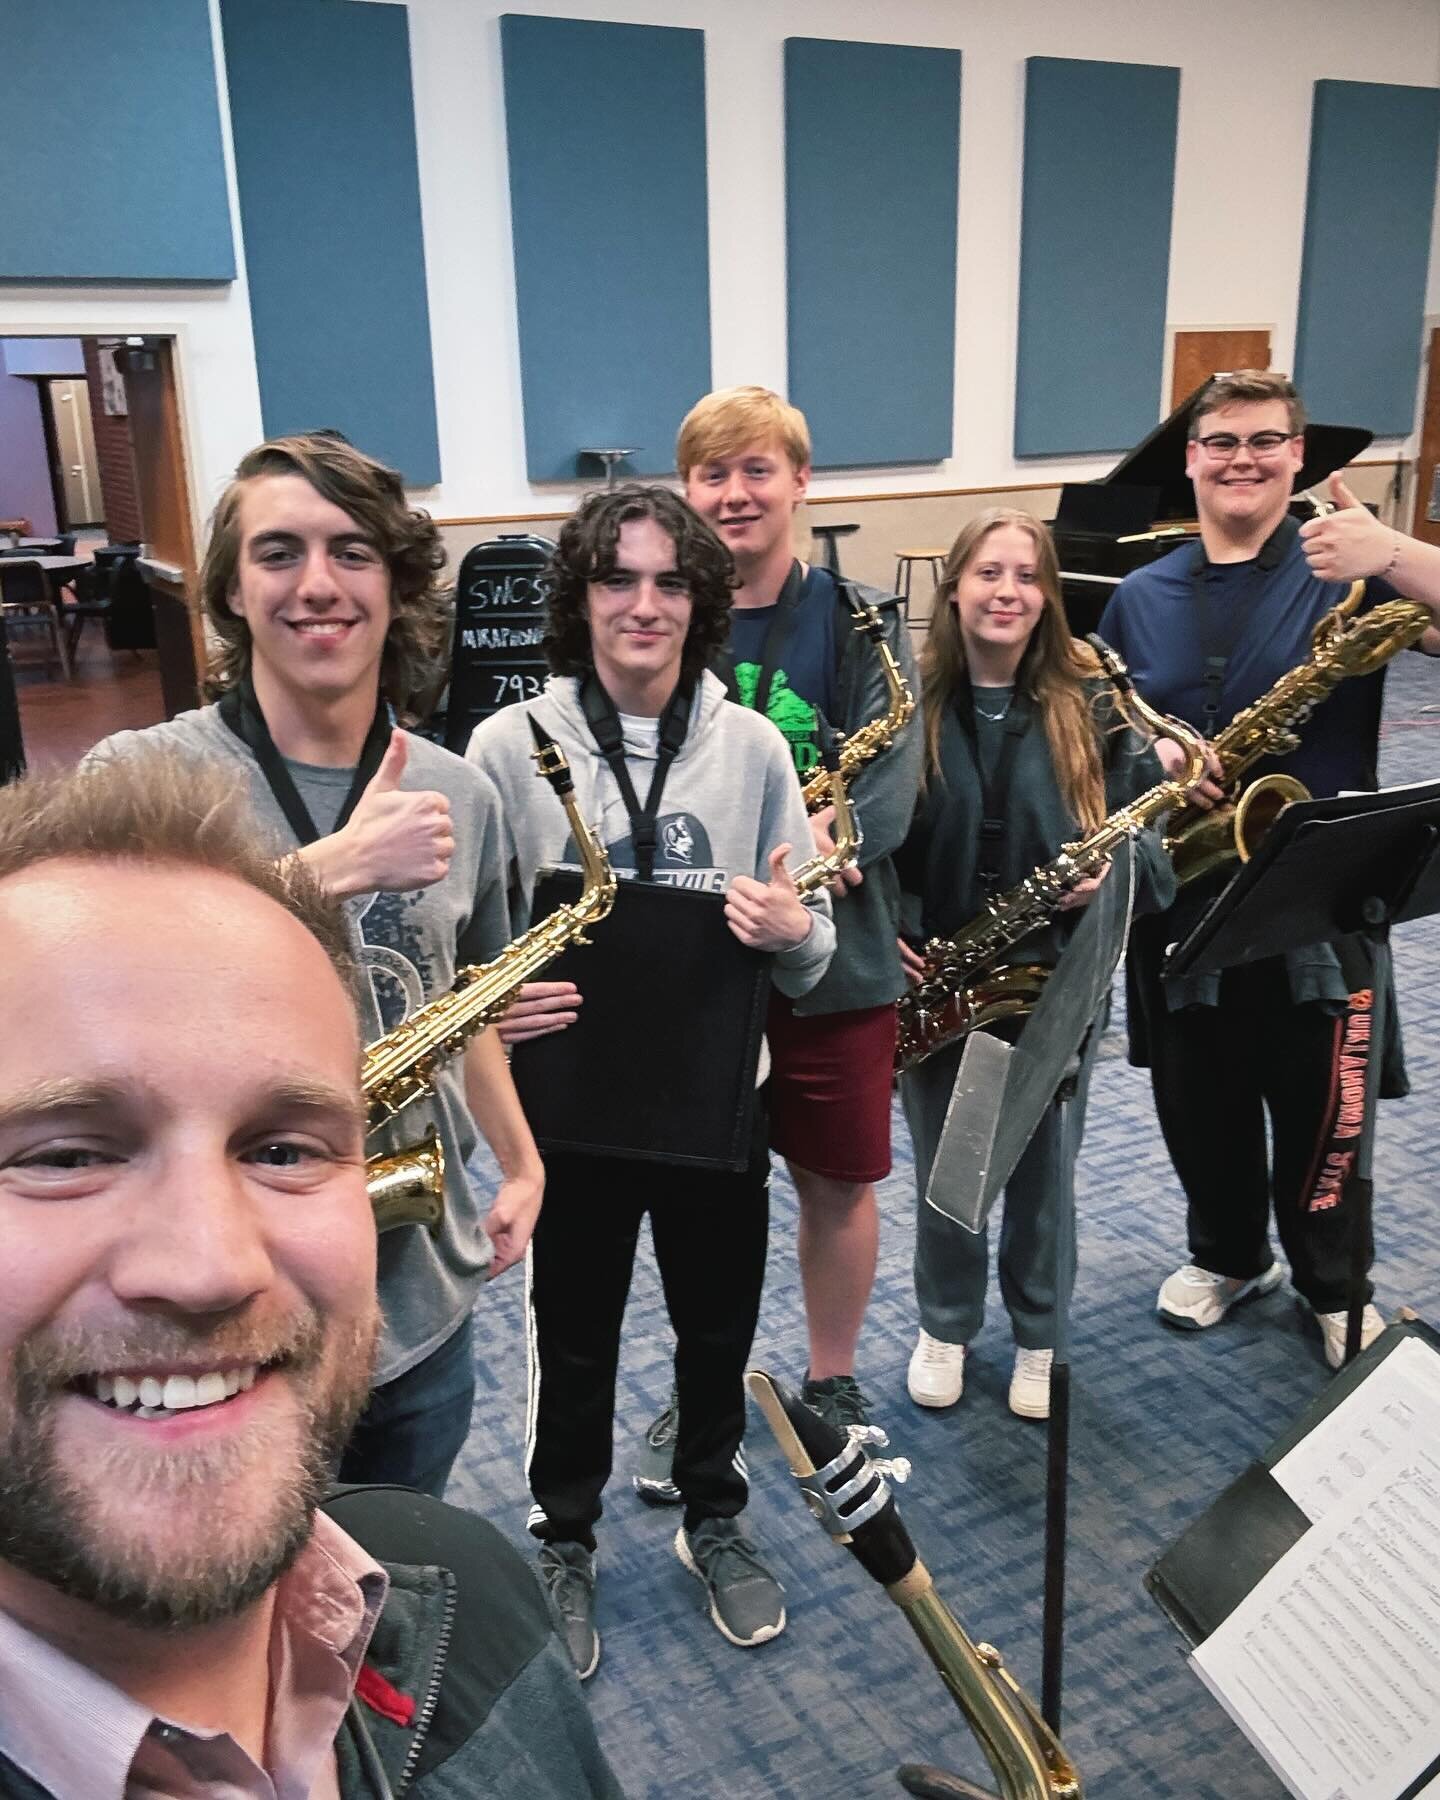 It was a pleasure to work with the Cordell High School saxophone quintet as they prepare to play at the state solo and ensemble contest! They&rsquo;re sounding great already 💪🏻🎷

#saxophone #classicalsaxophone #saxophonequartet #chambermusic #swos